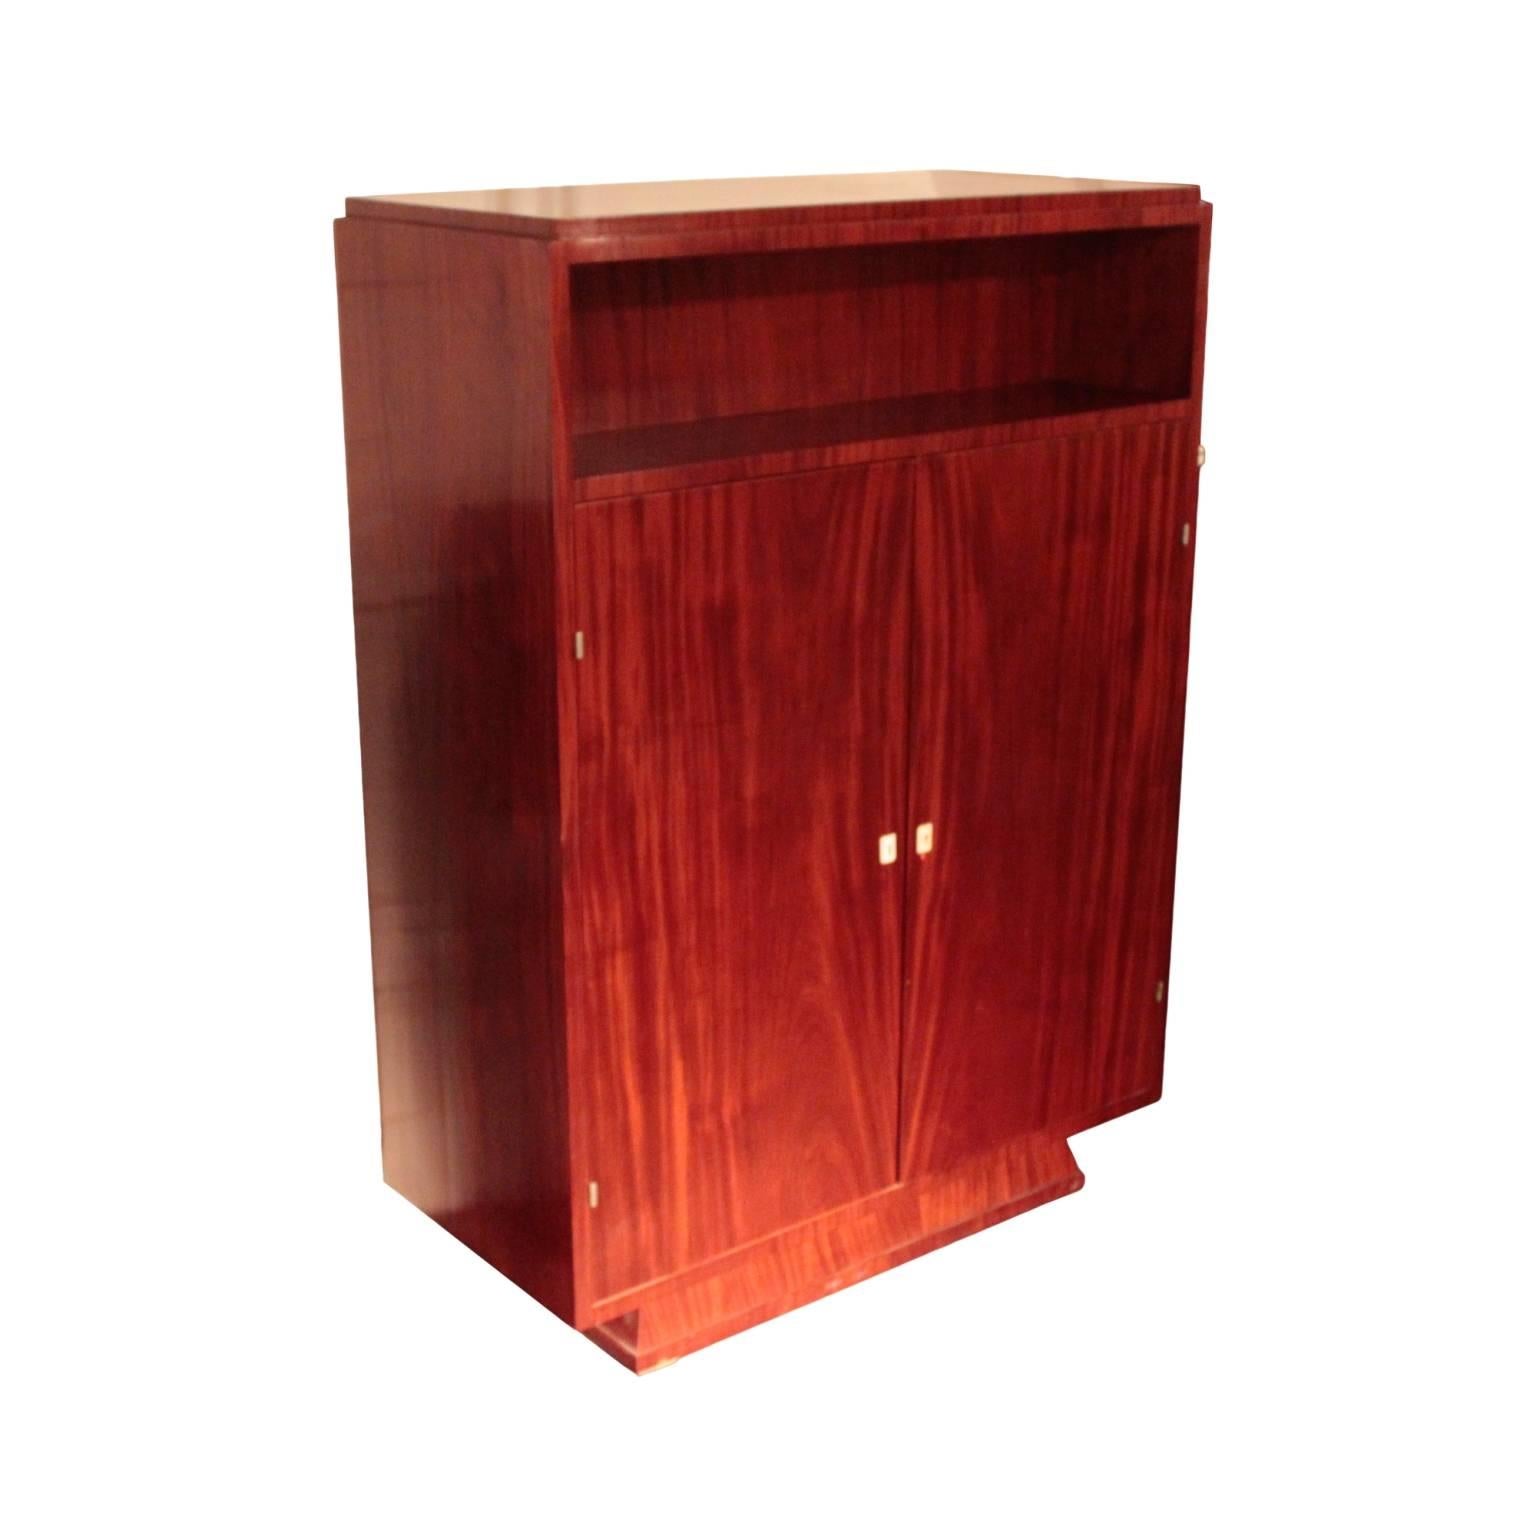 French Art Deco period cabinet of excellent quality in the manner of Jules Leleu, in solid and veneered African ribbon mahogany, including interior. Cuboid shaped body having an exposed niche on top of a pair of doors fitted with ivory escutcheons